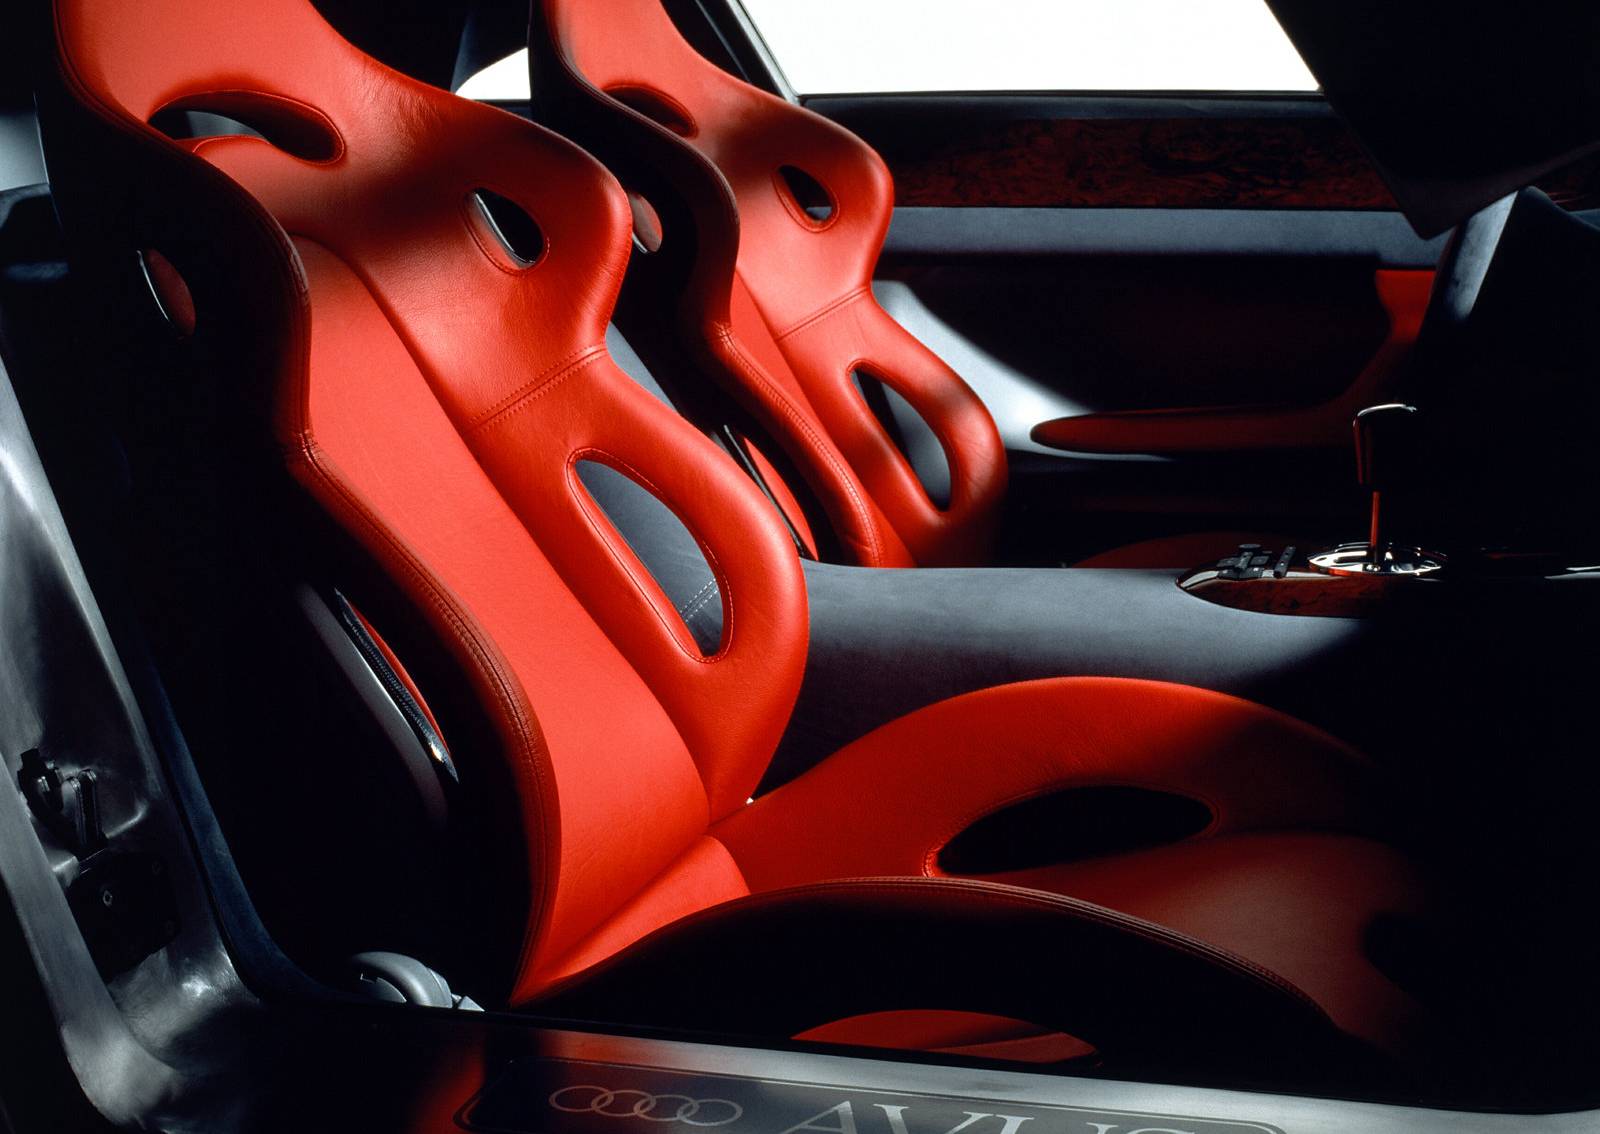 The cabin might have dated a bit, but those bucket seats still look the part.